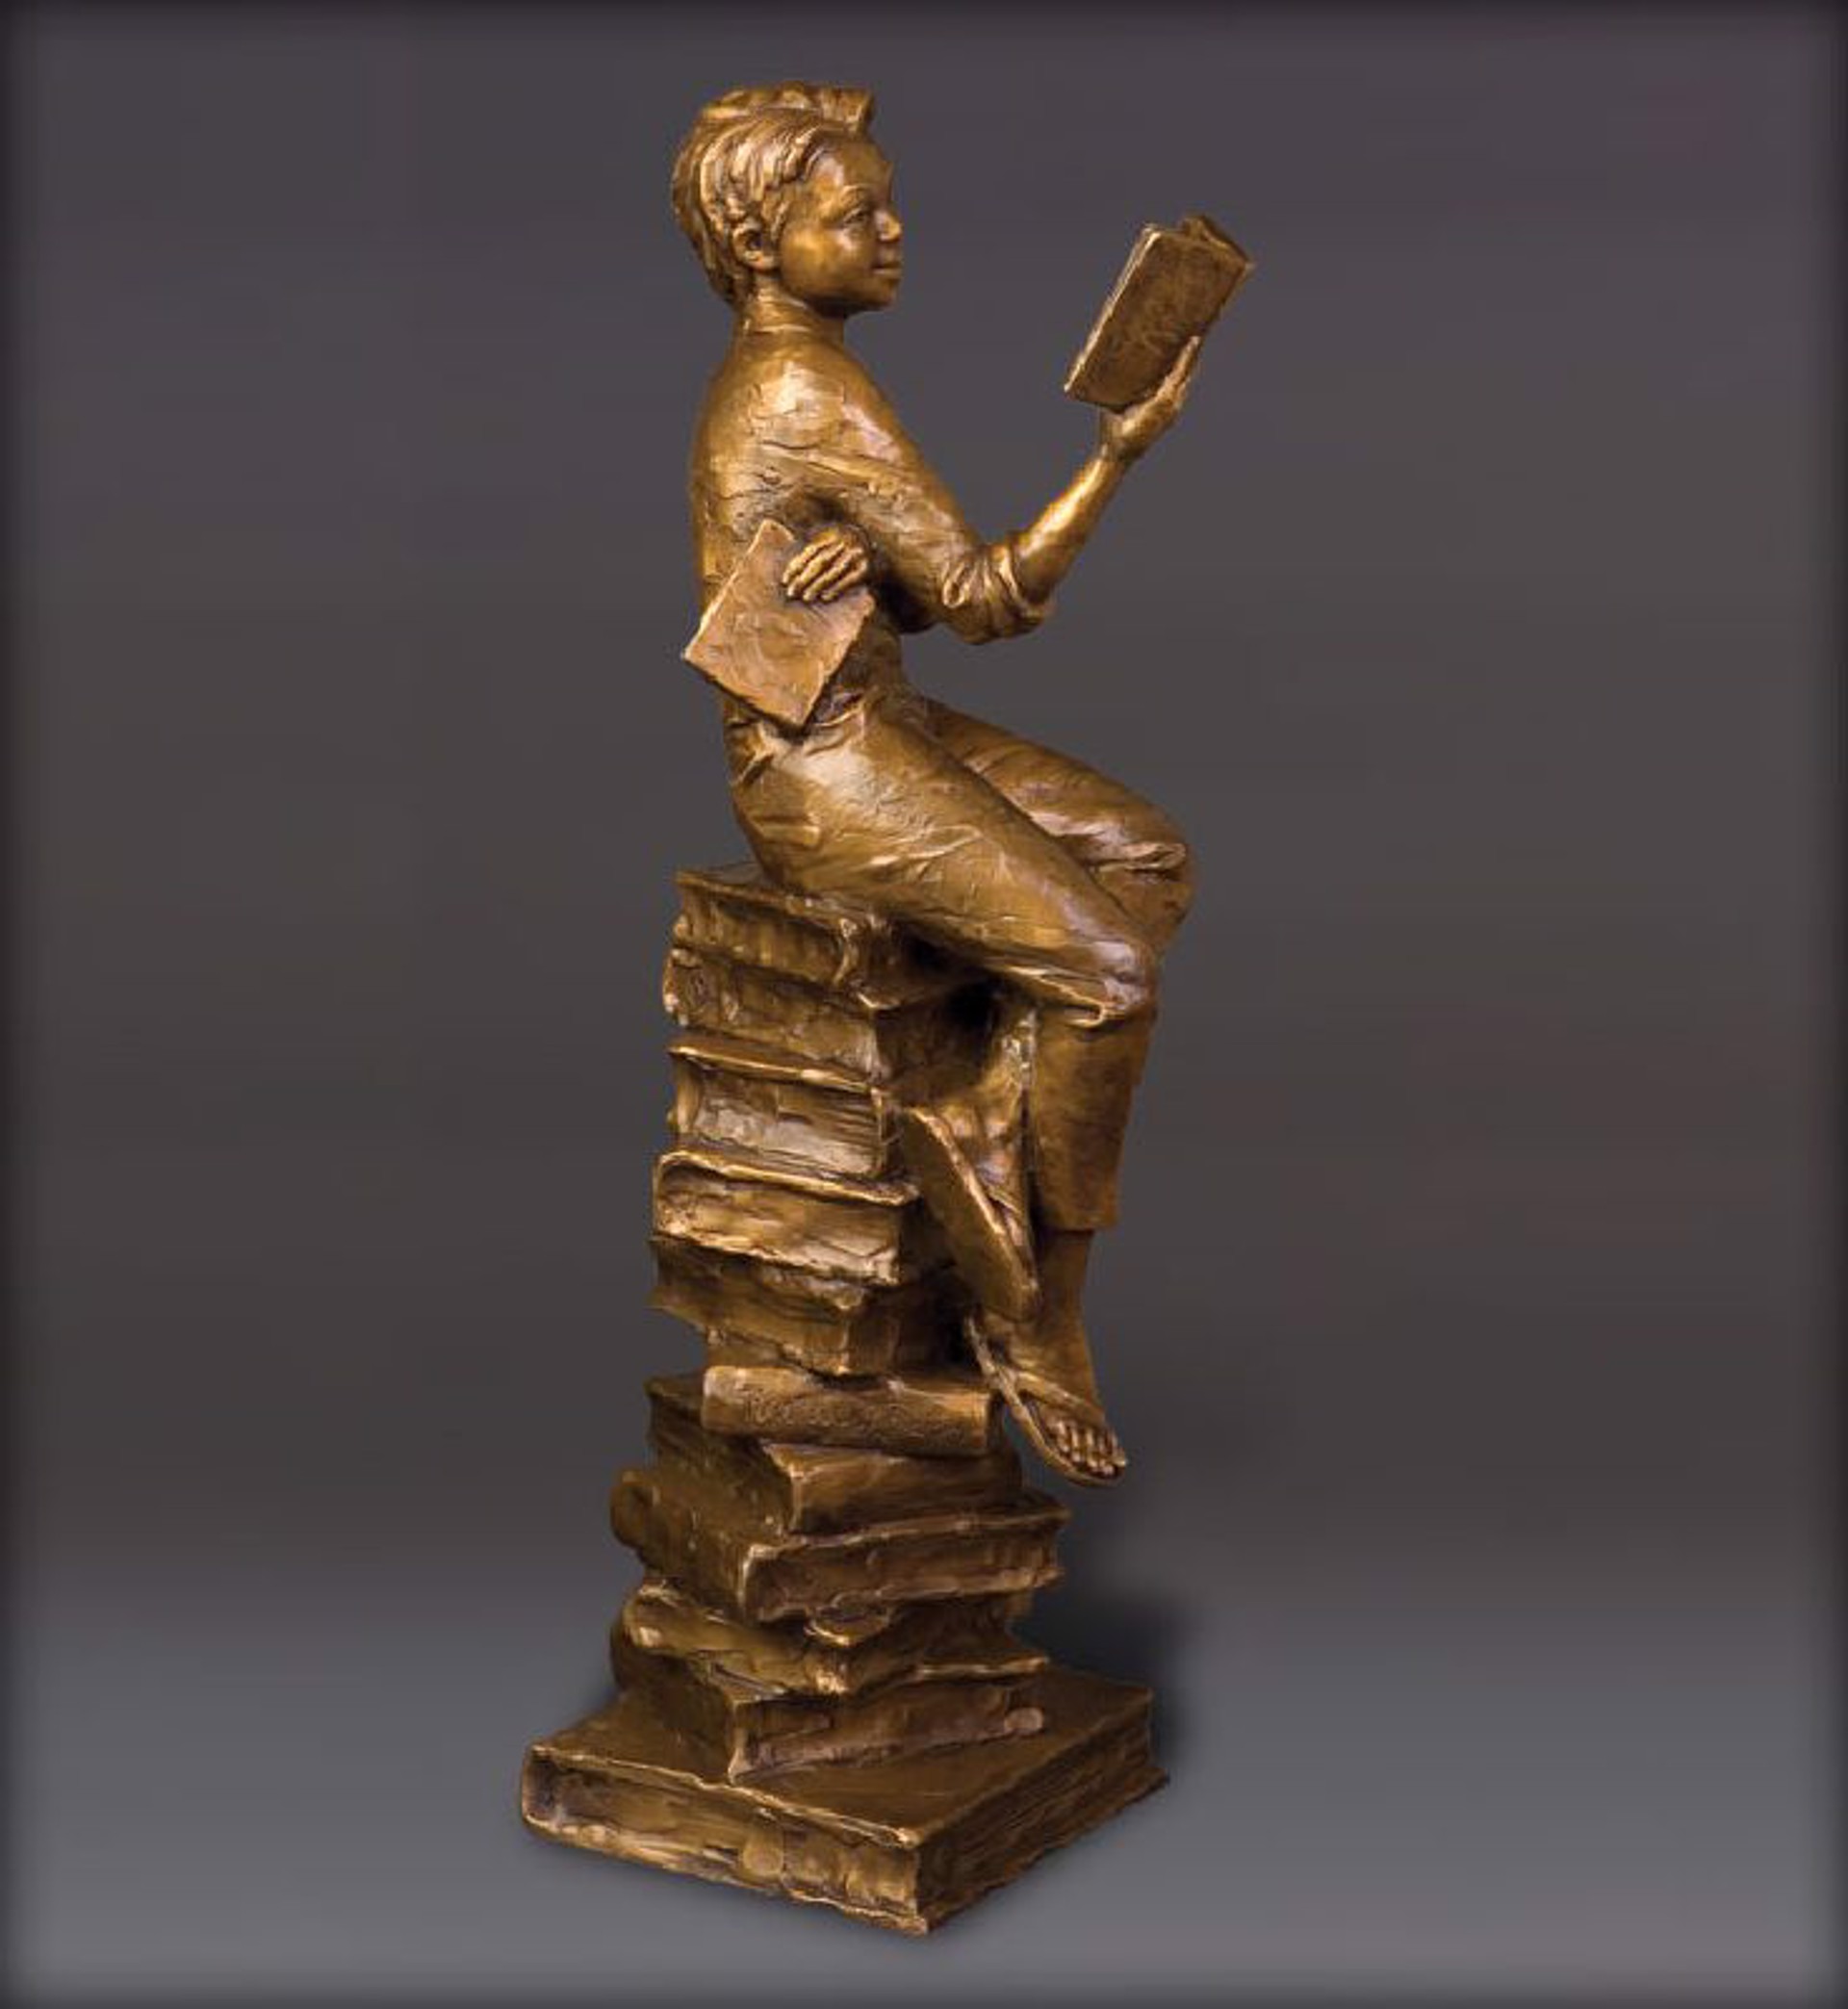 New Heights of Knowledge: Great Expectations by Gary Lee Price (sculptor)